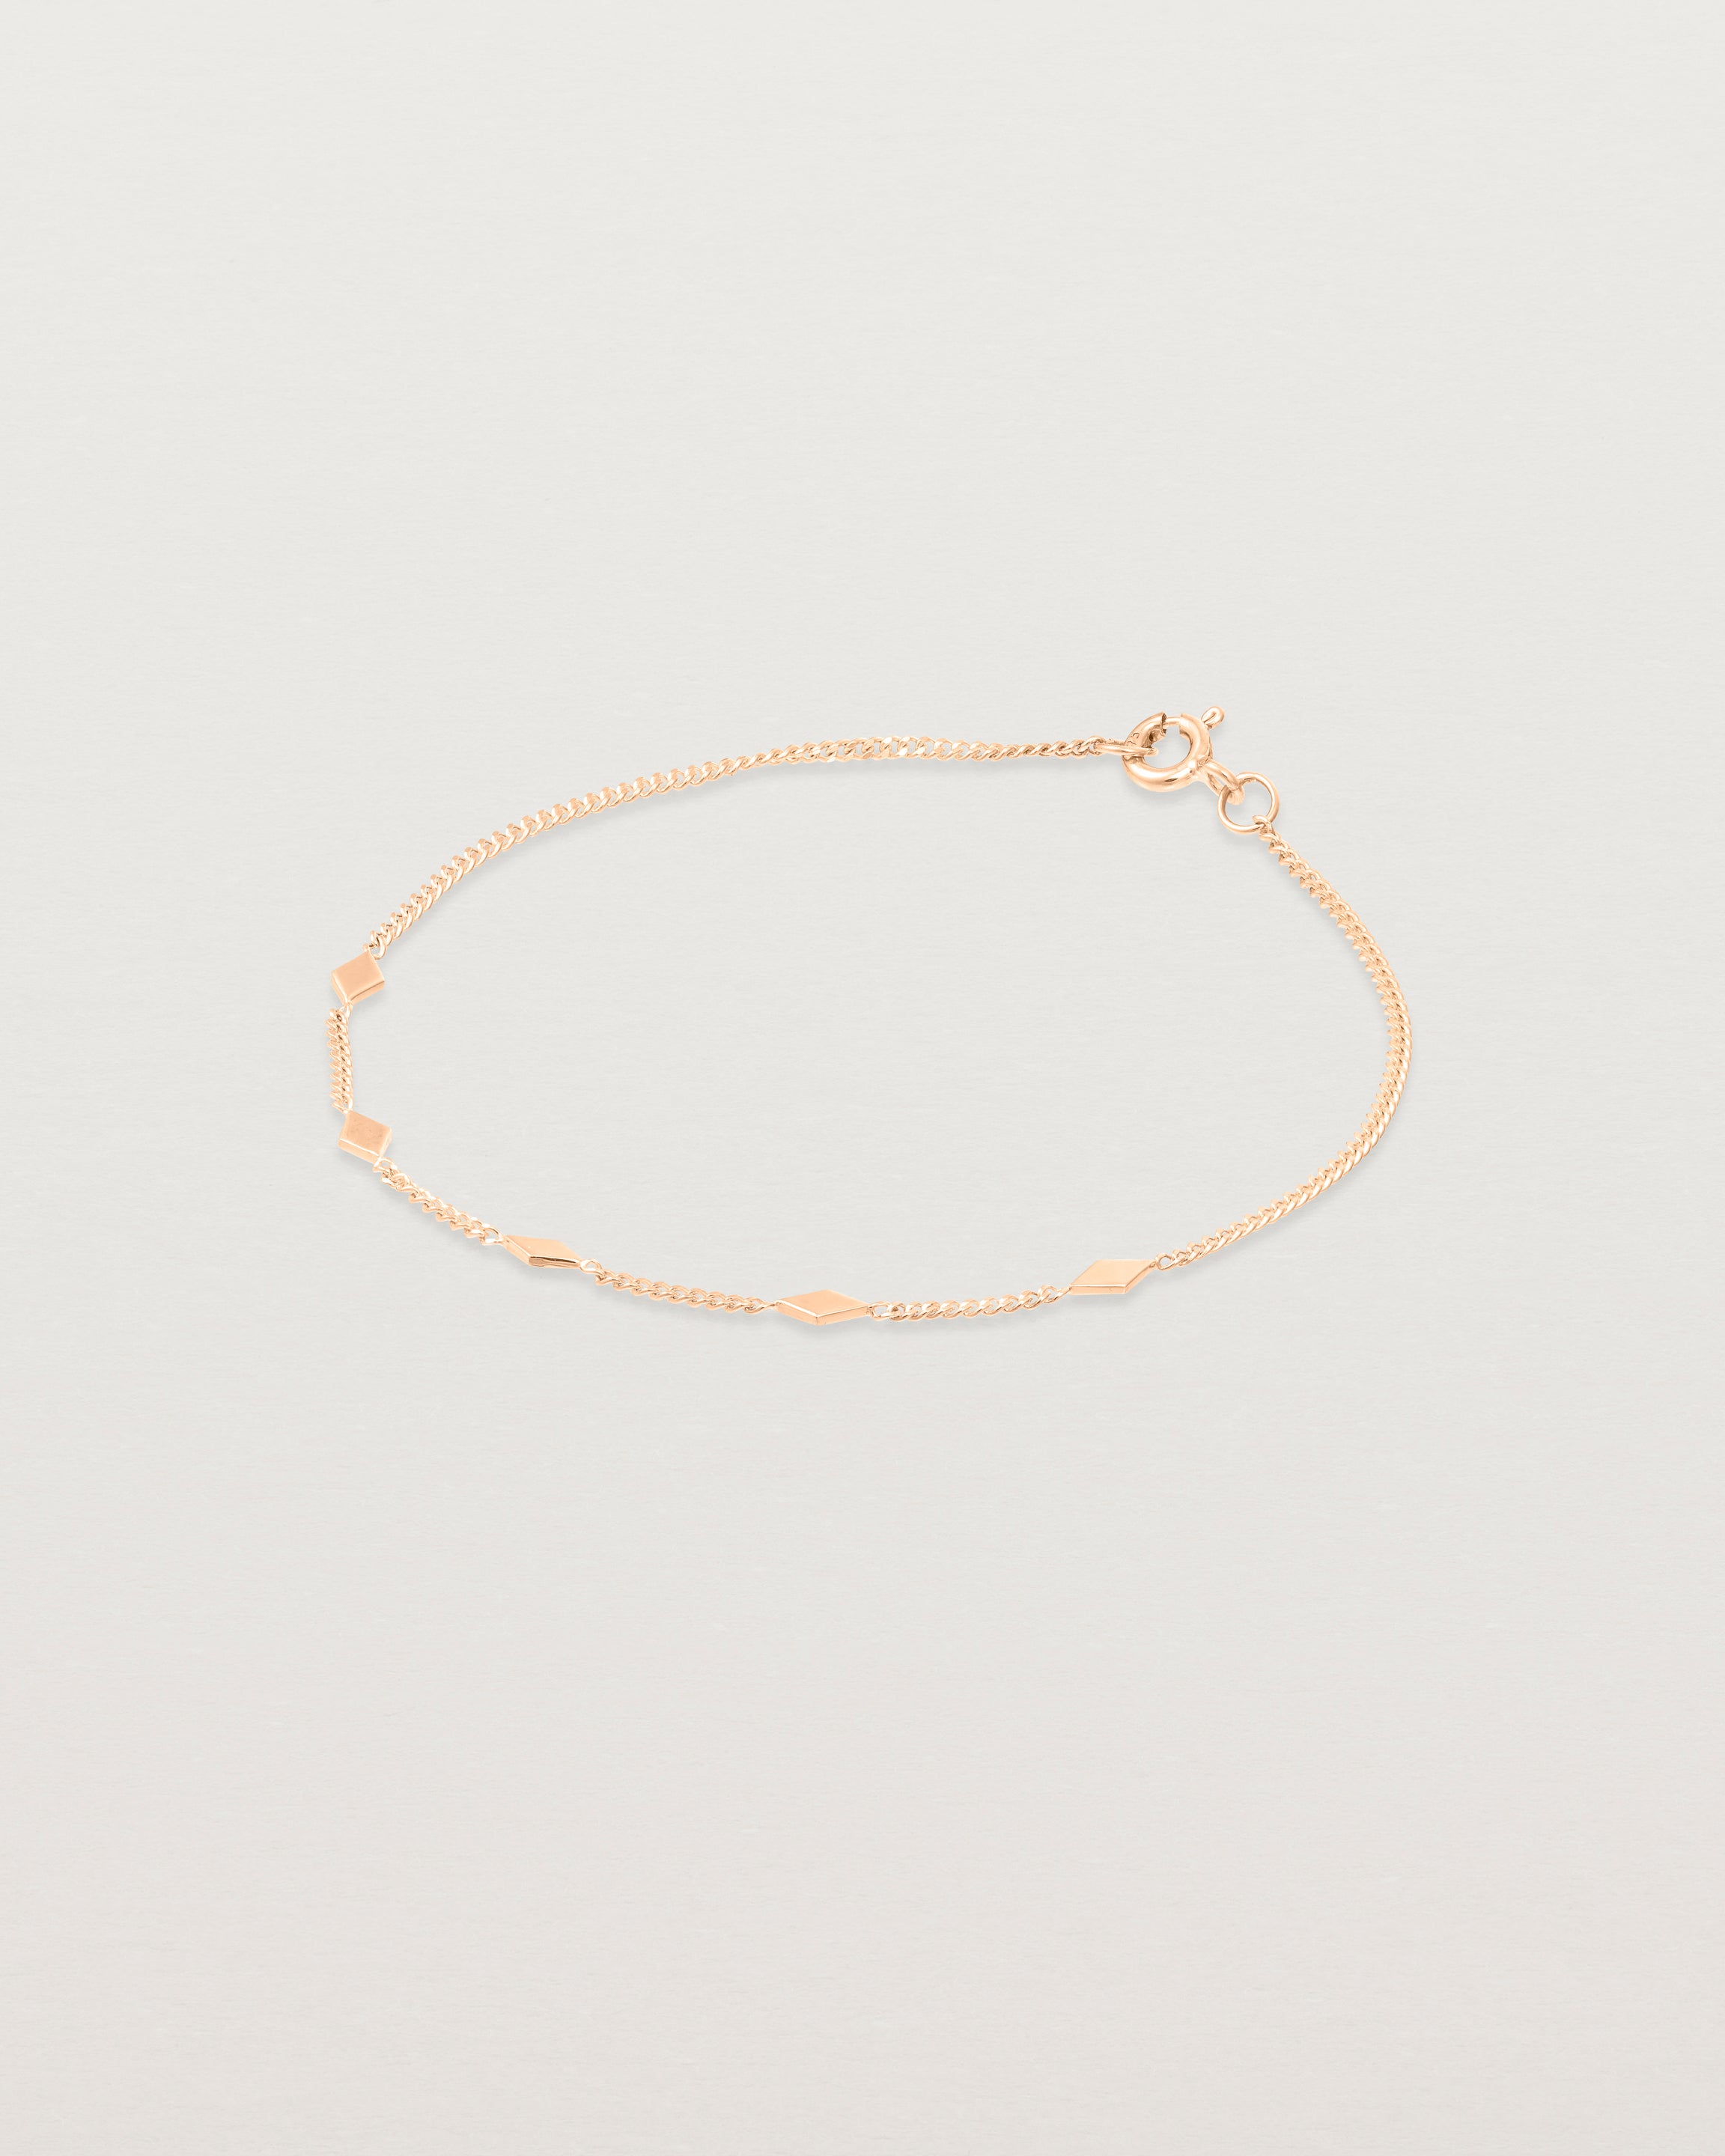 Slight angled view of the Nuna Charm Bracelet in Rose Gold.